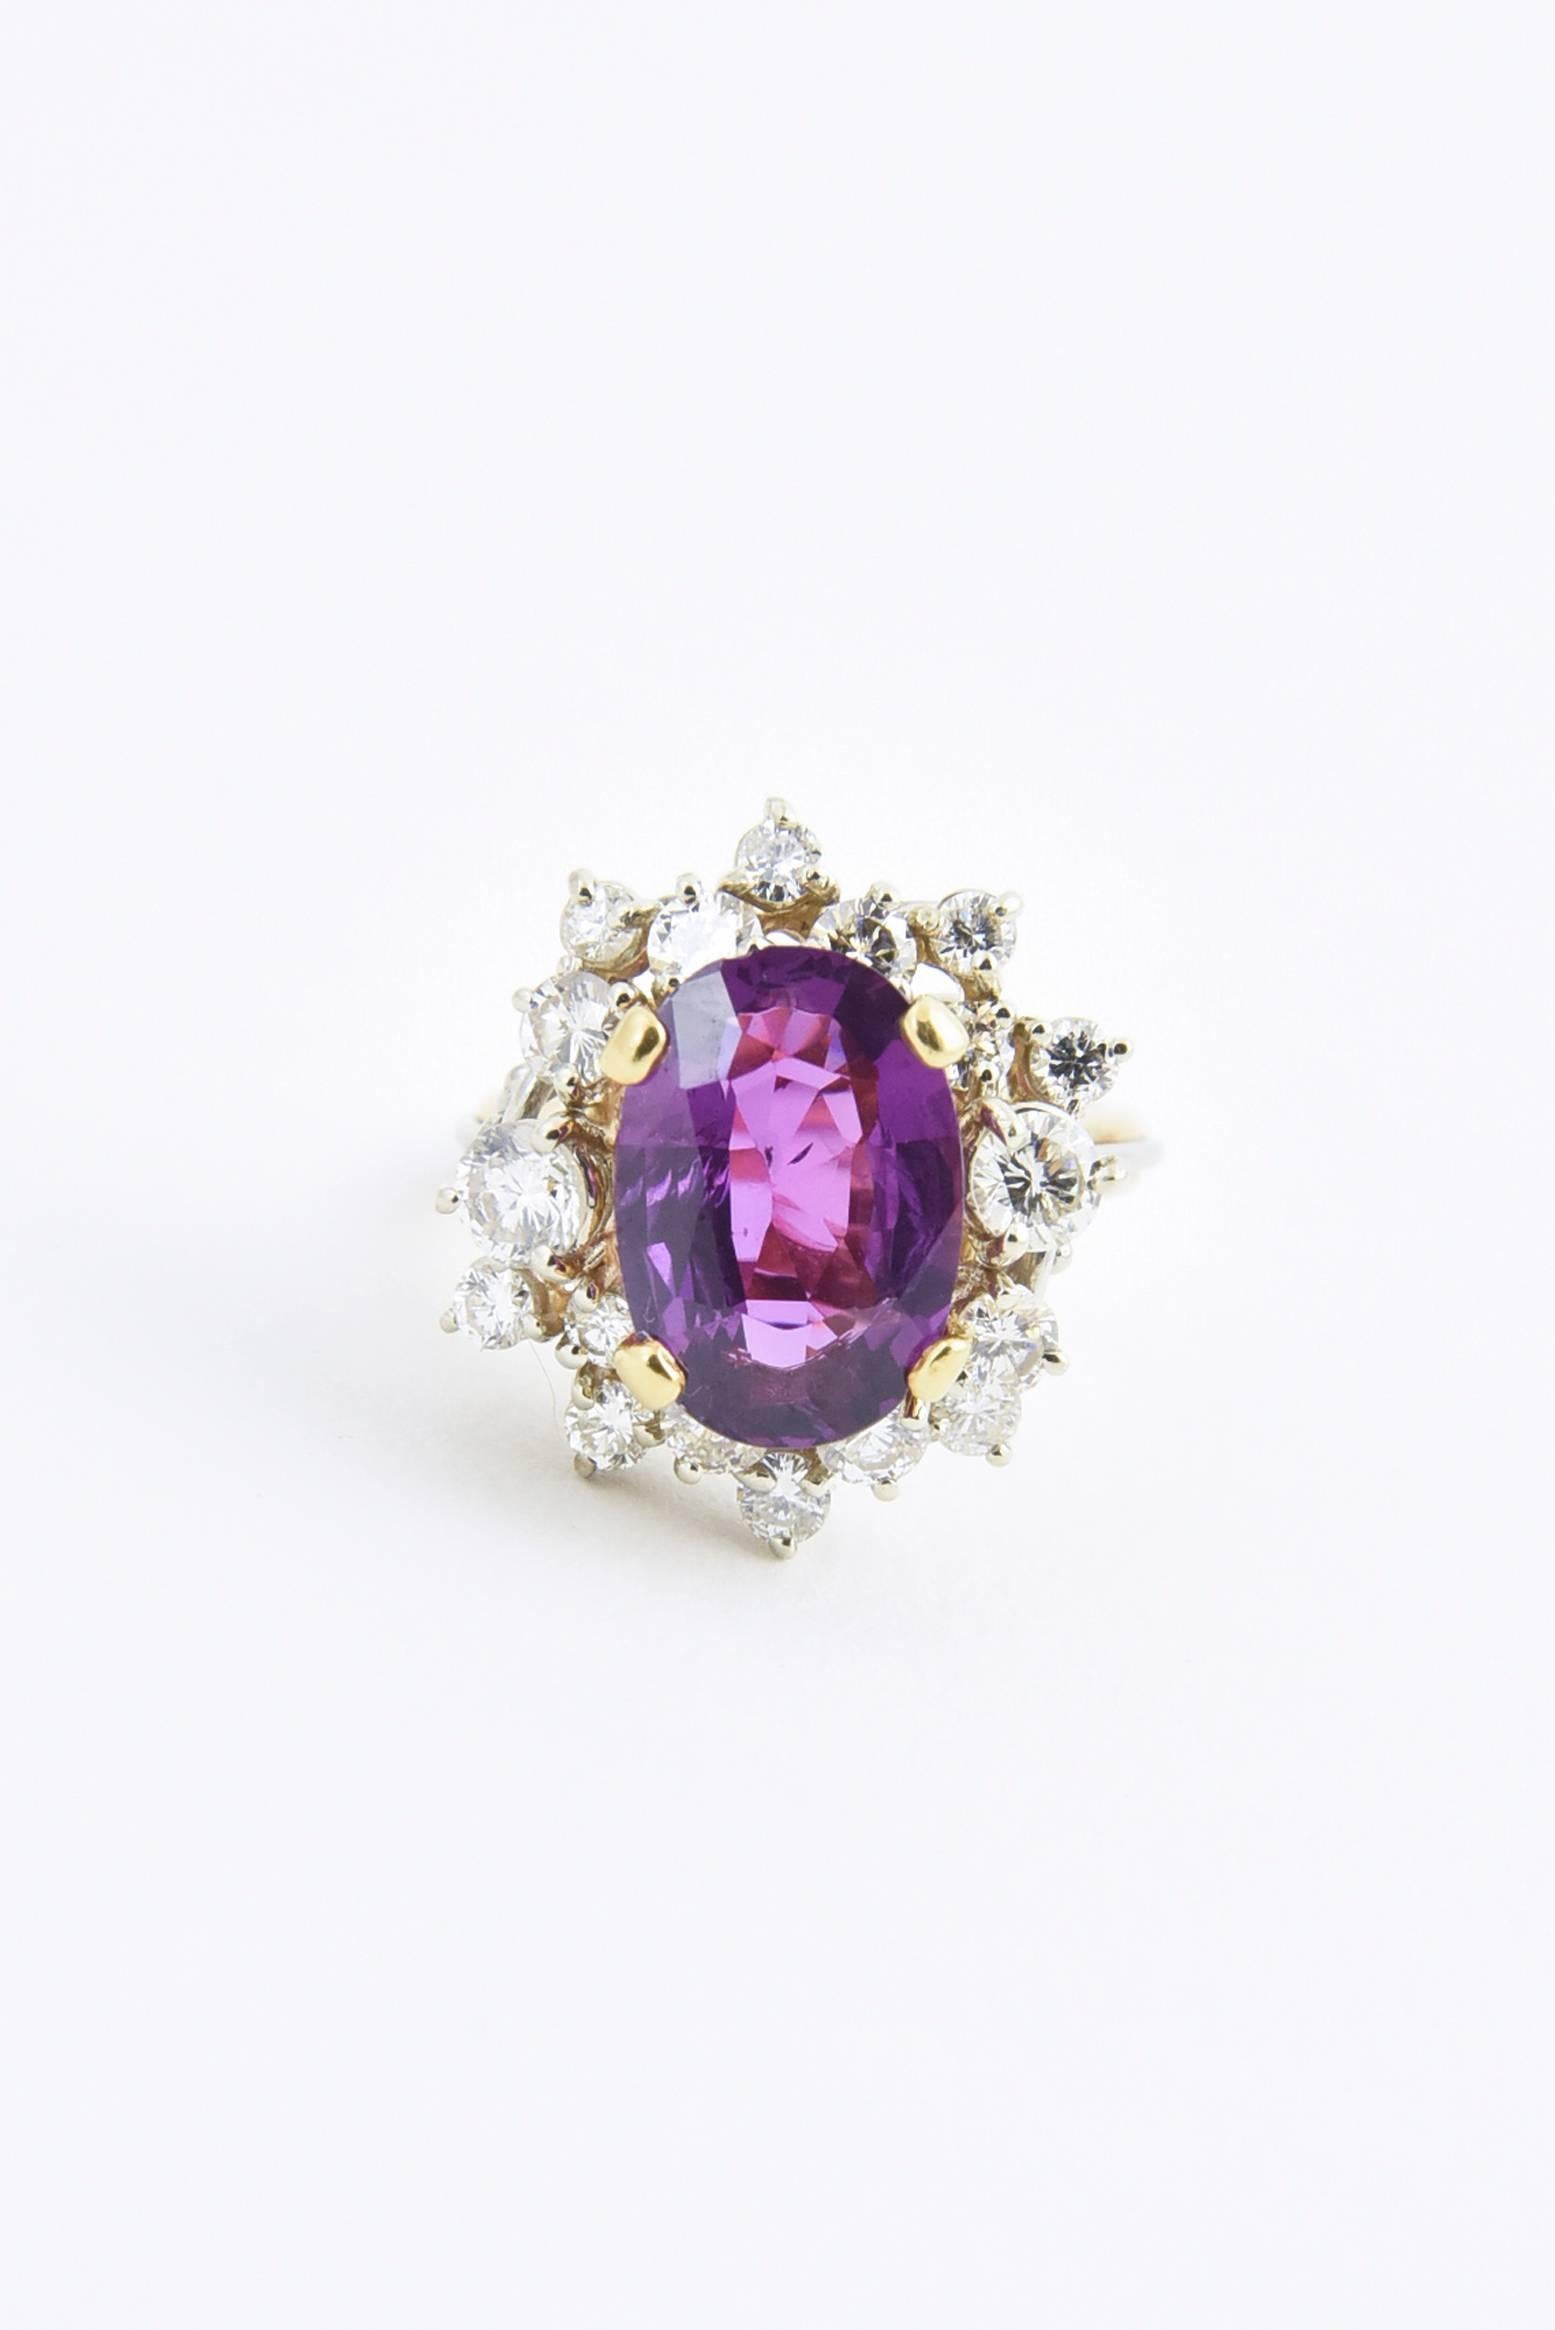 4 Carat Oval Pinkish Purple Sapphire Diamond Gold Cocktail Ring with GIA Cert For Sale 1